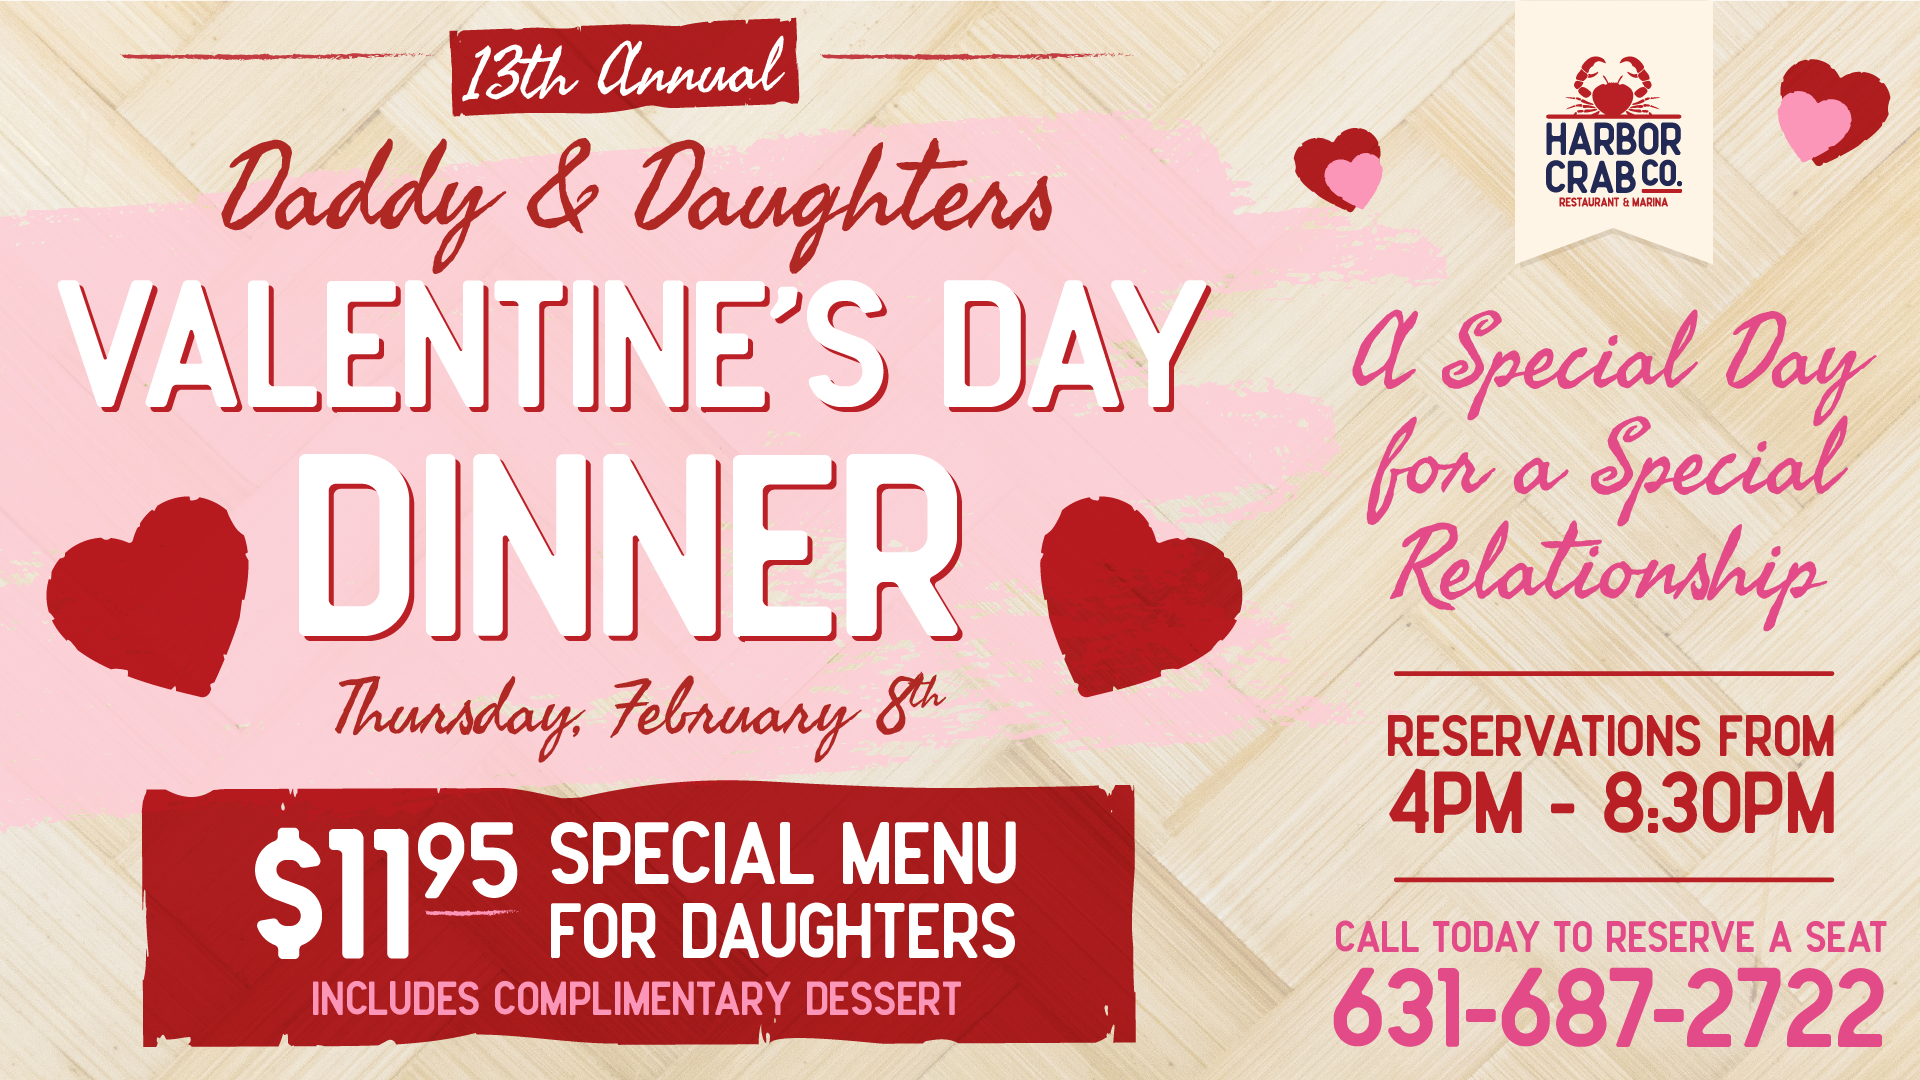 13th Annual Daddy & Daughter's Valentine's Day Dinner on February 8th